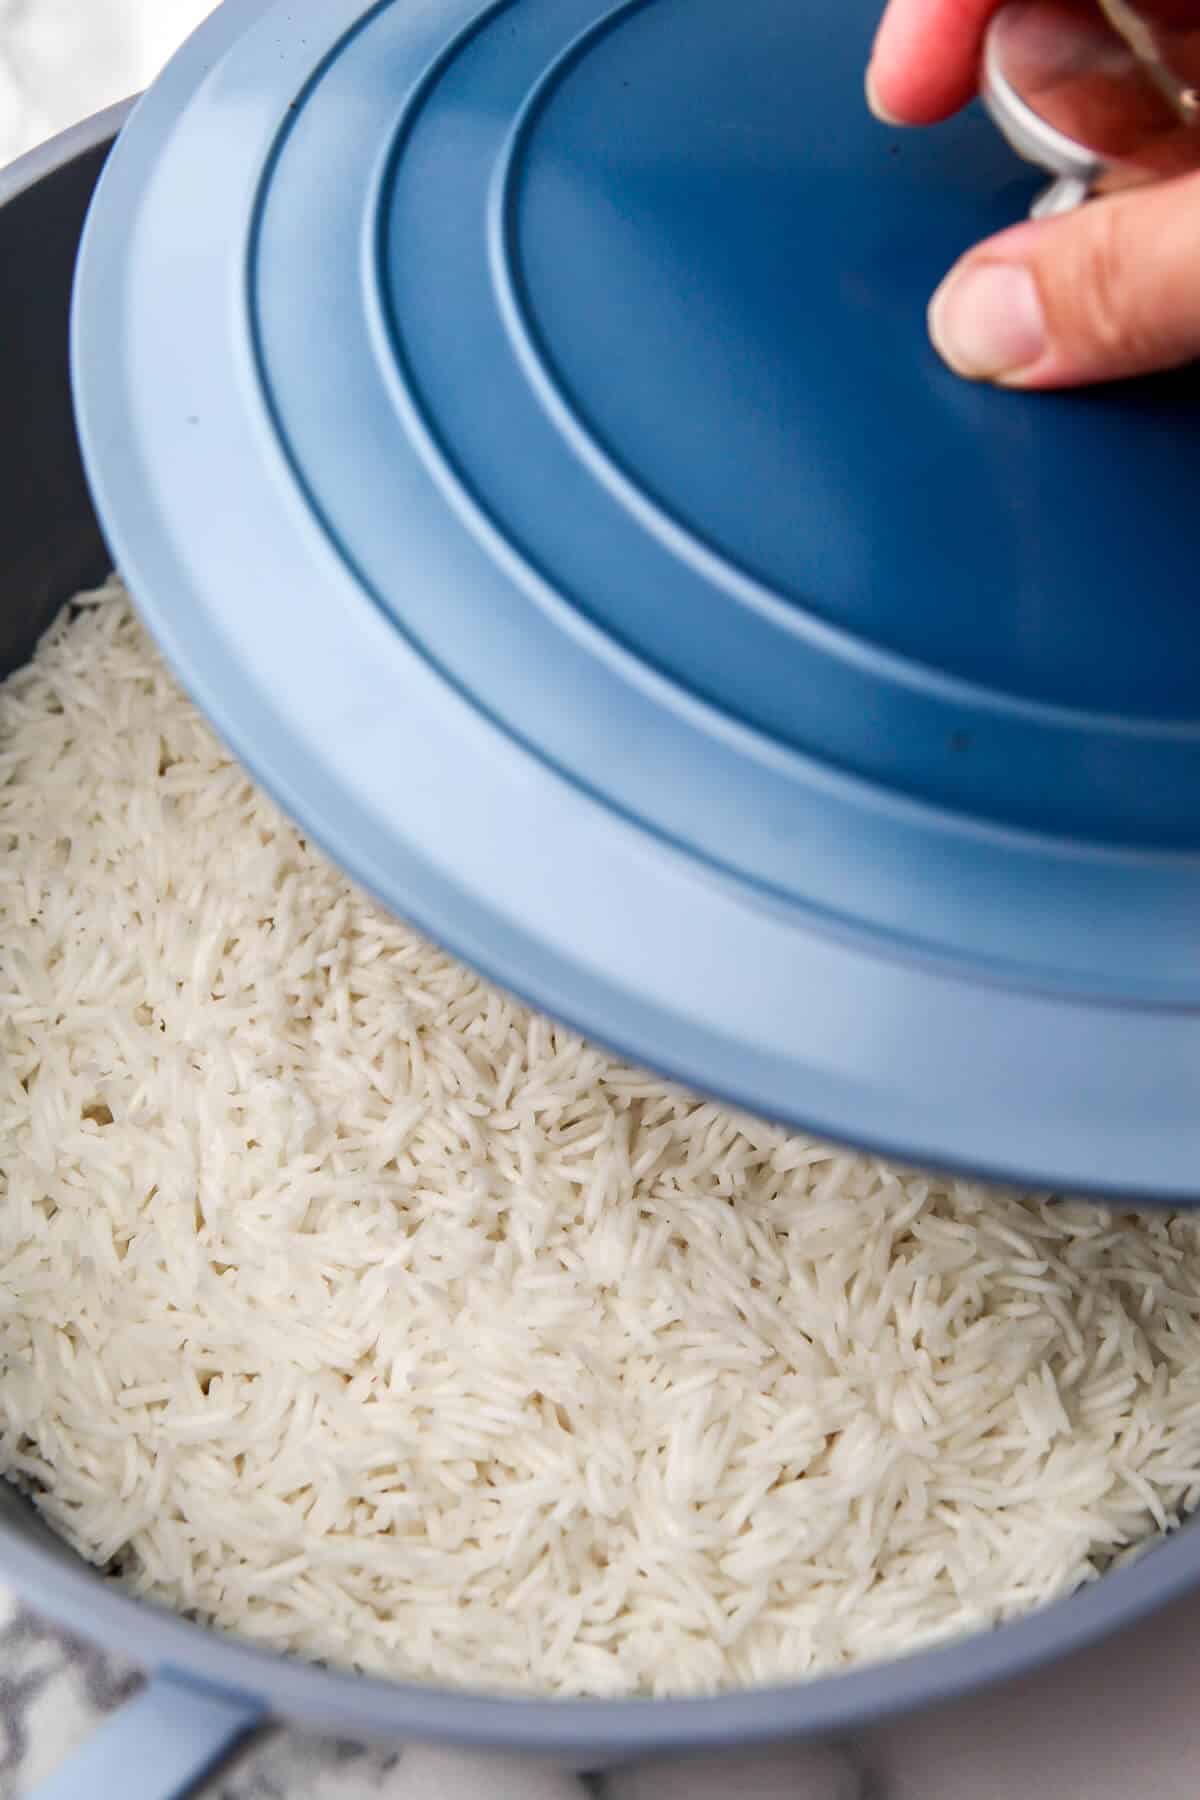 Placing a lid on rice during the cooking process.